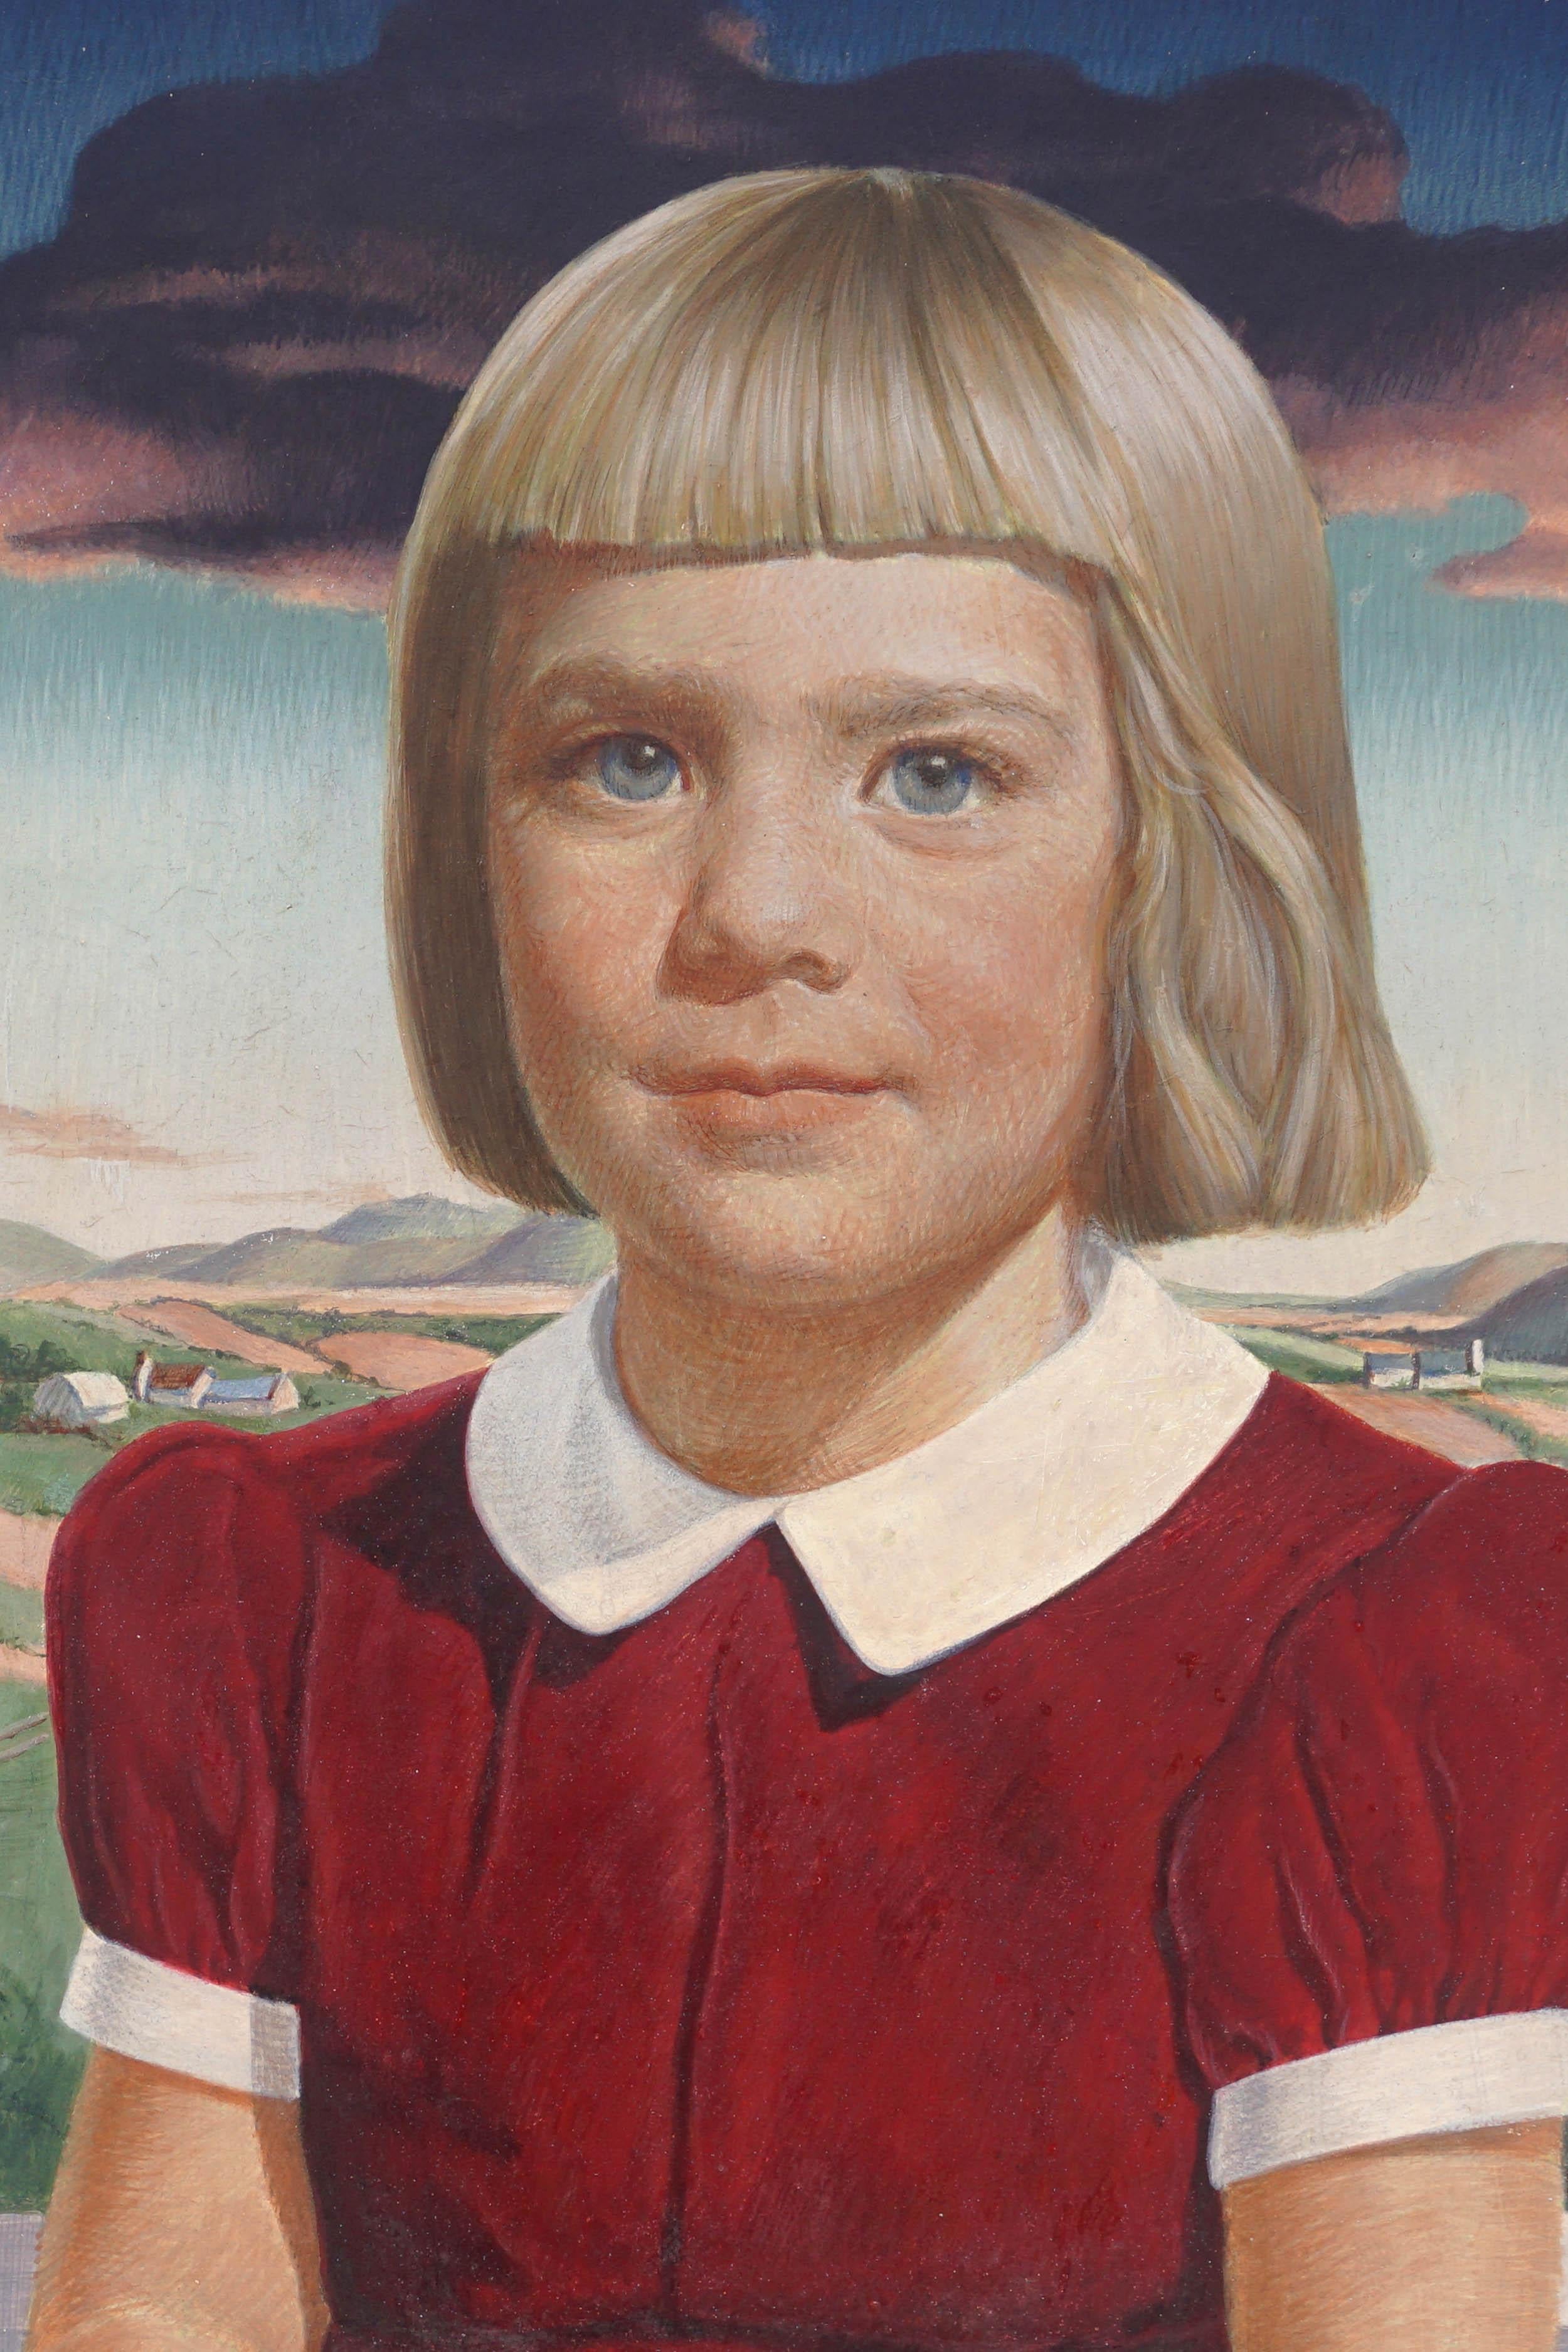 Mid Century Young Blonde Girl Portrait Egg Tempera - Style of Thomas Hart Benton - Painting by Robert Collins